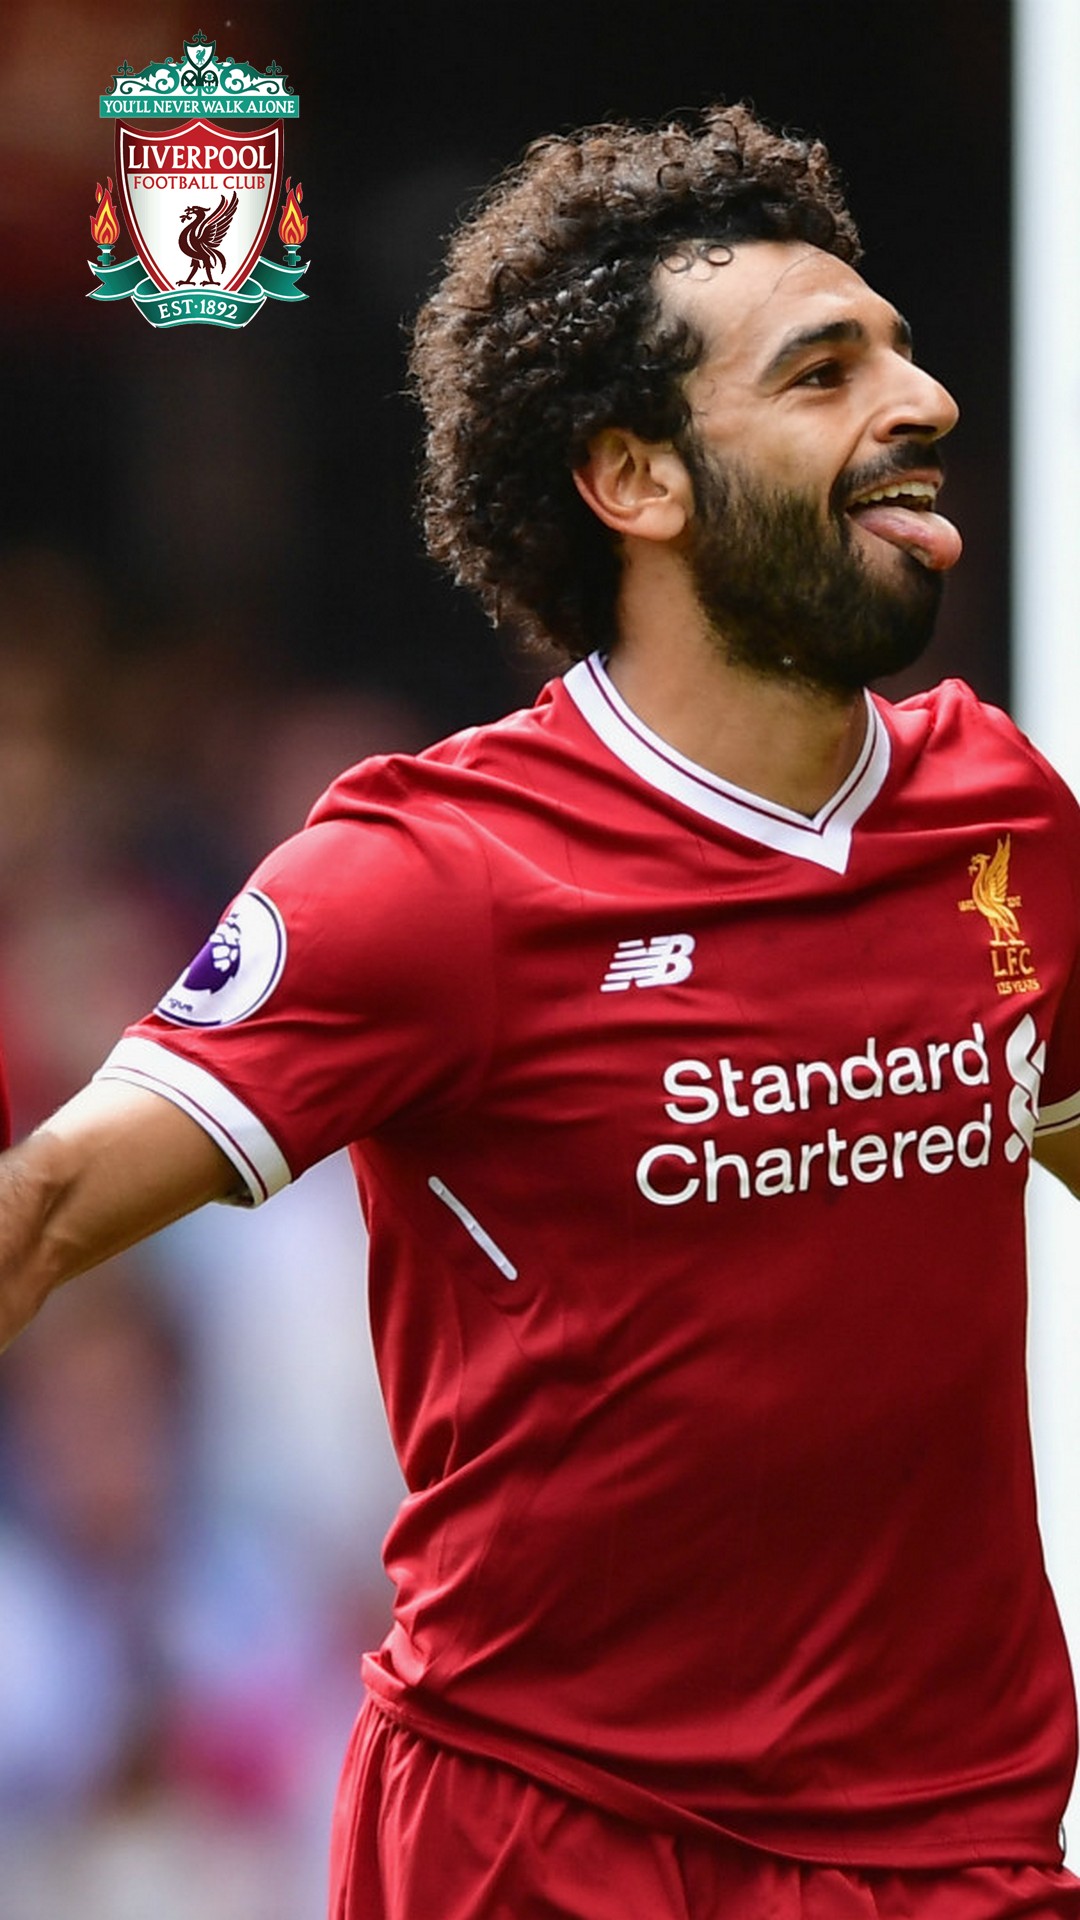 Mohamed Salah Liverpool Wallpaper Android with resolution 1080X1920 pixel. You can make this wallpaper for your Android backgrounds, Tablet, Smartphones Screensavers and Mobile Phone Lock Screen